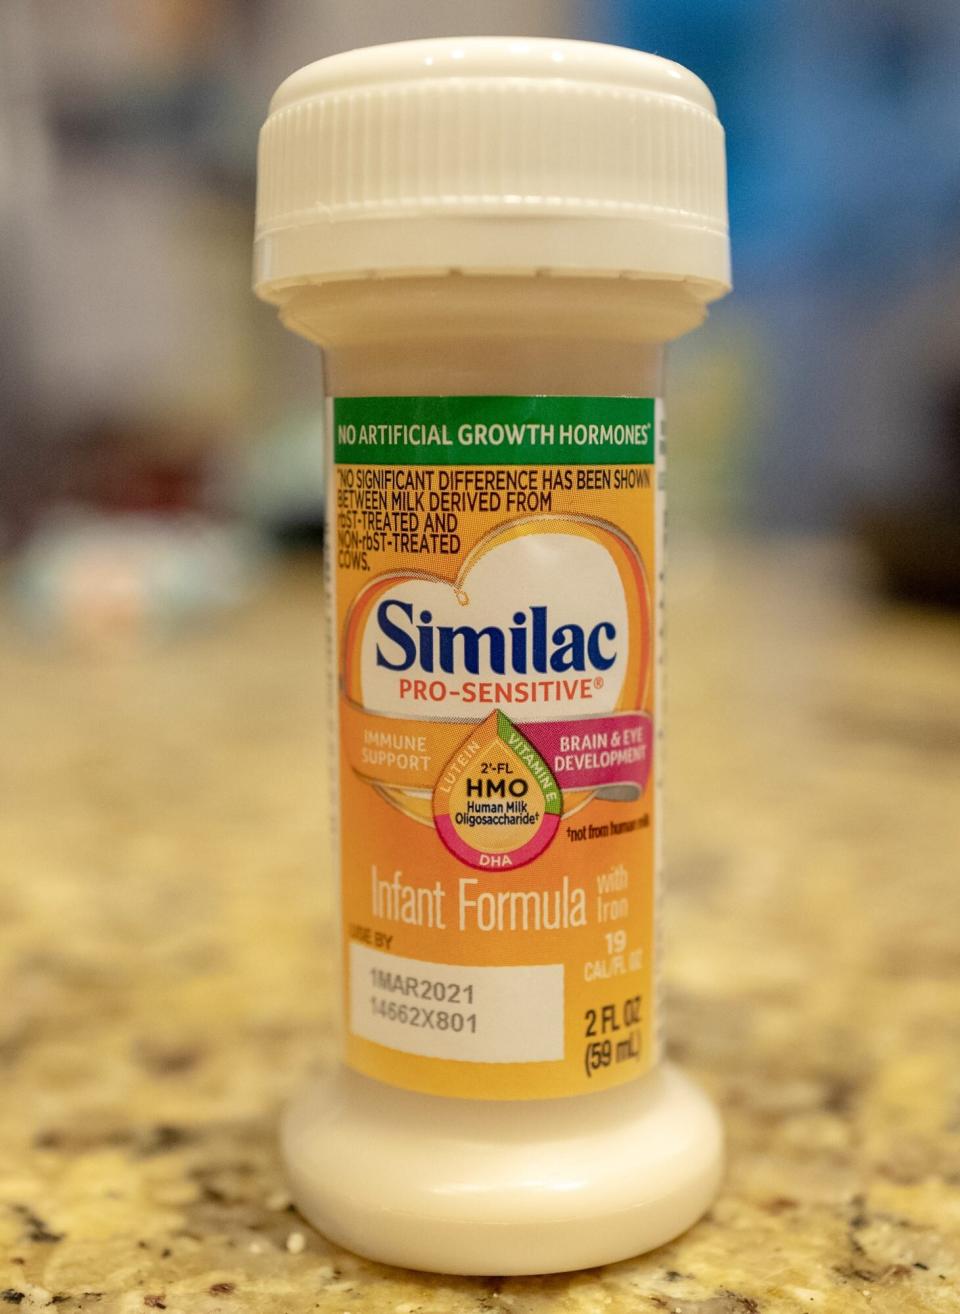 Close-up of Similac baby formula, a brand of Abbott Nutrition, San Ramon, California, May 11, 2020. (Photo by Smith Collection/Gado/Getty Images)